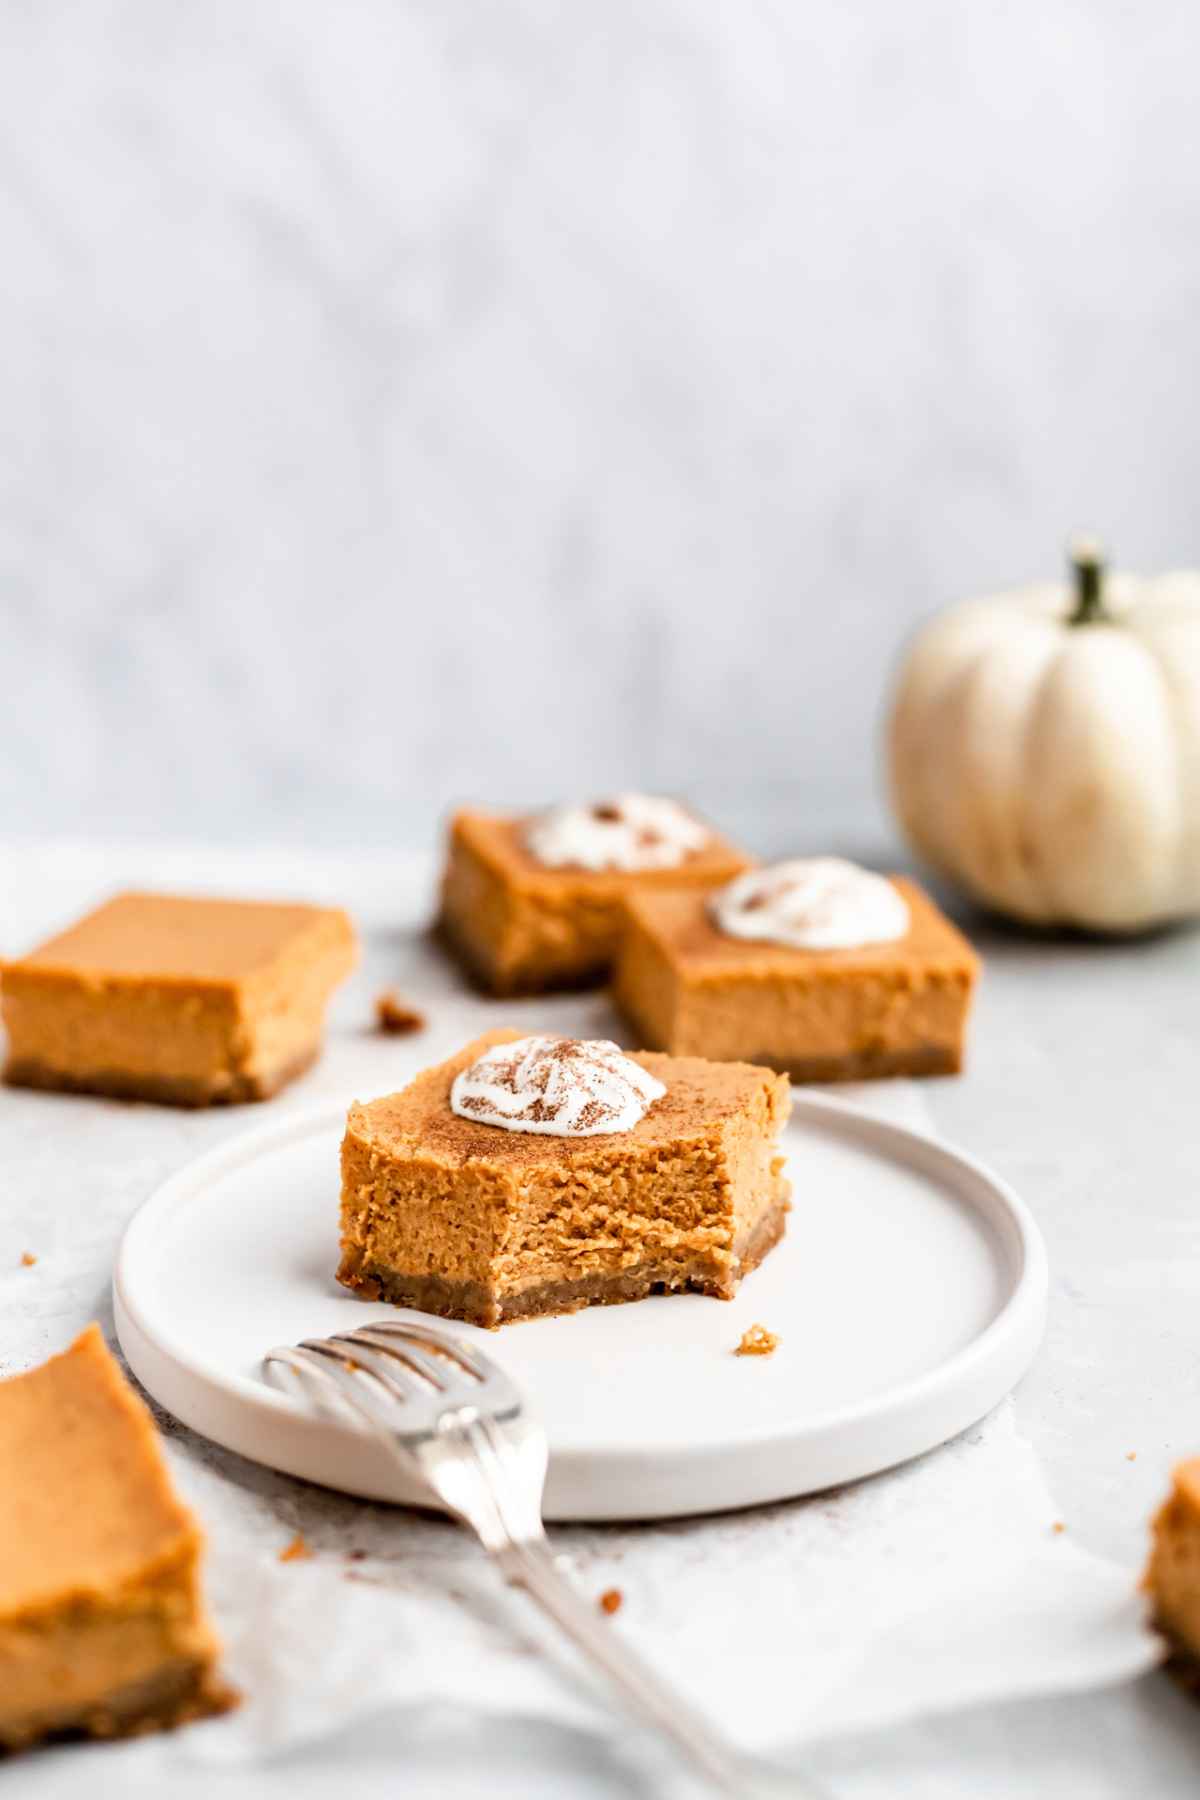 Pumpkin cheesecake bar on a white plate with a bite missing.